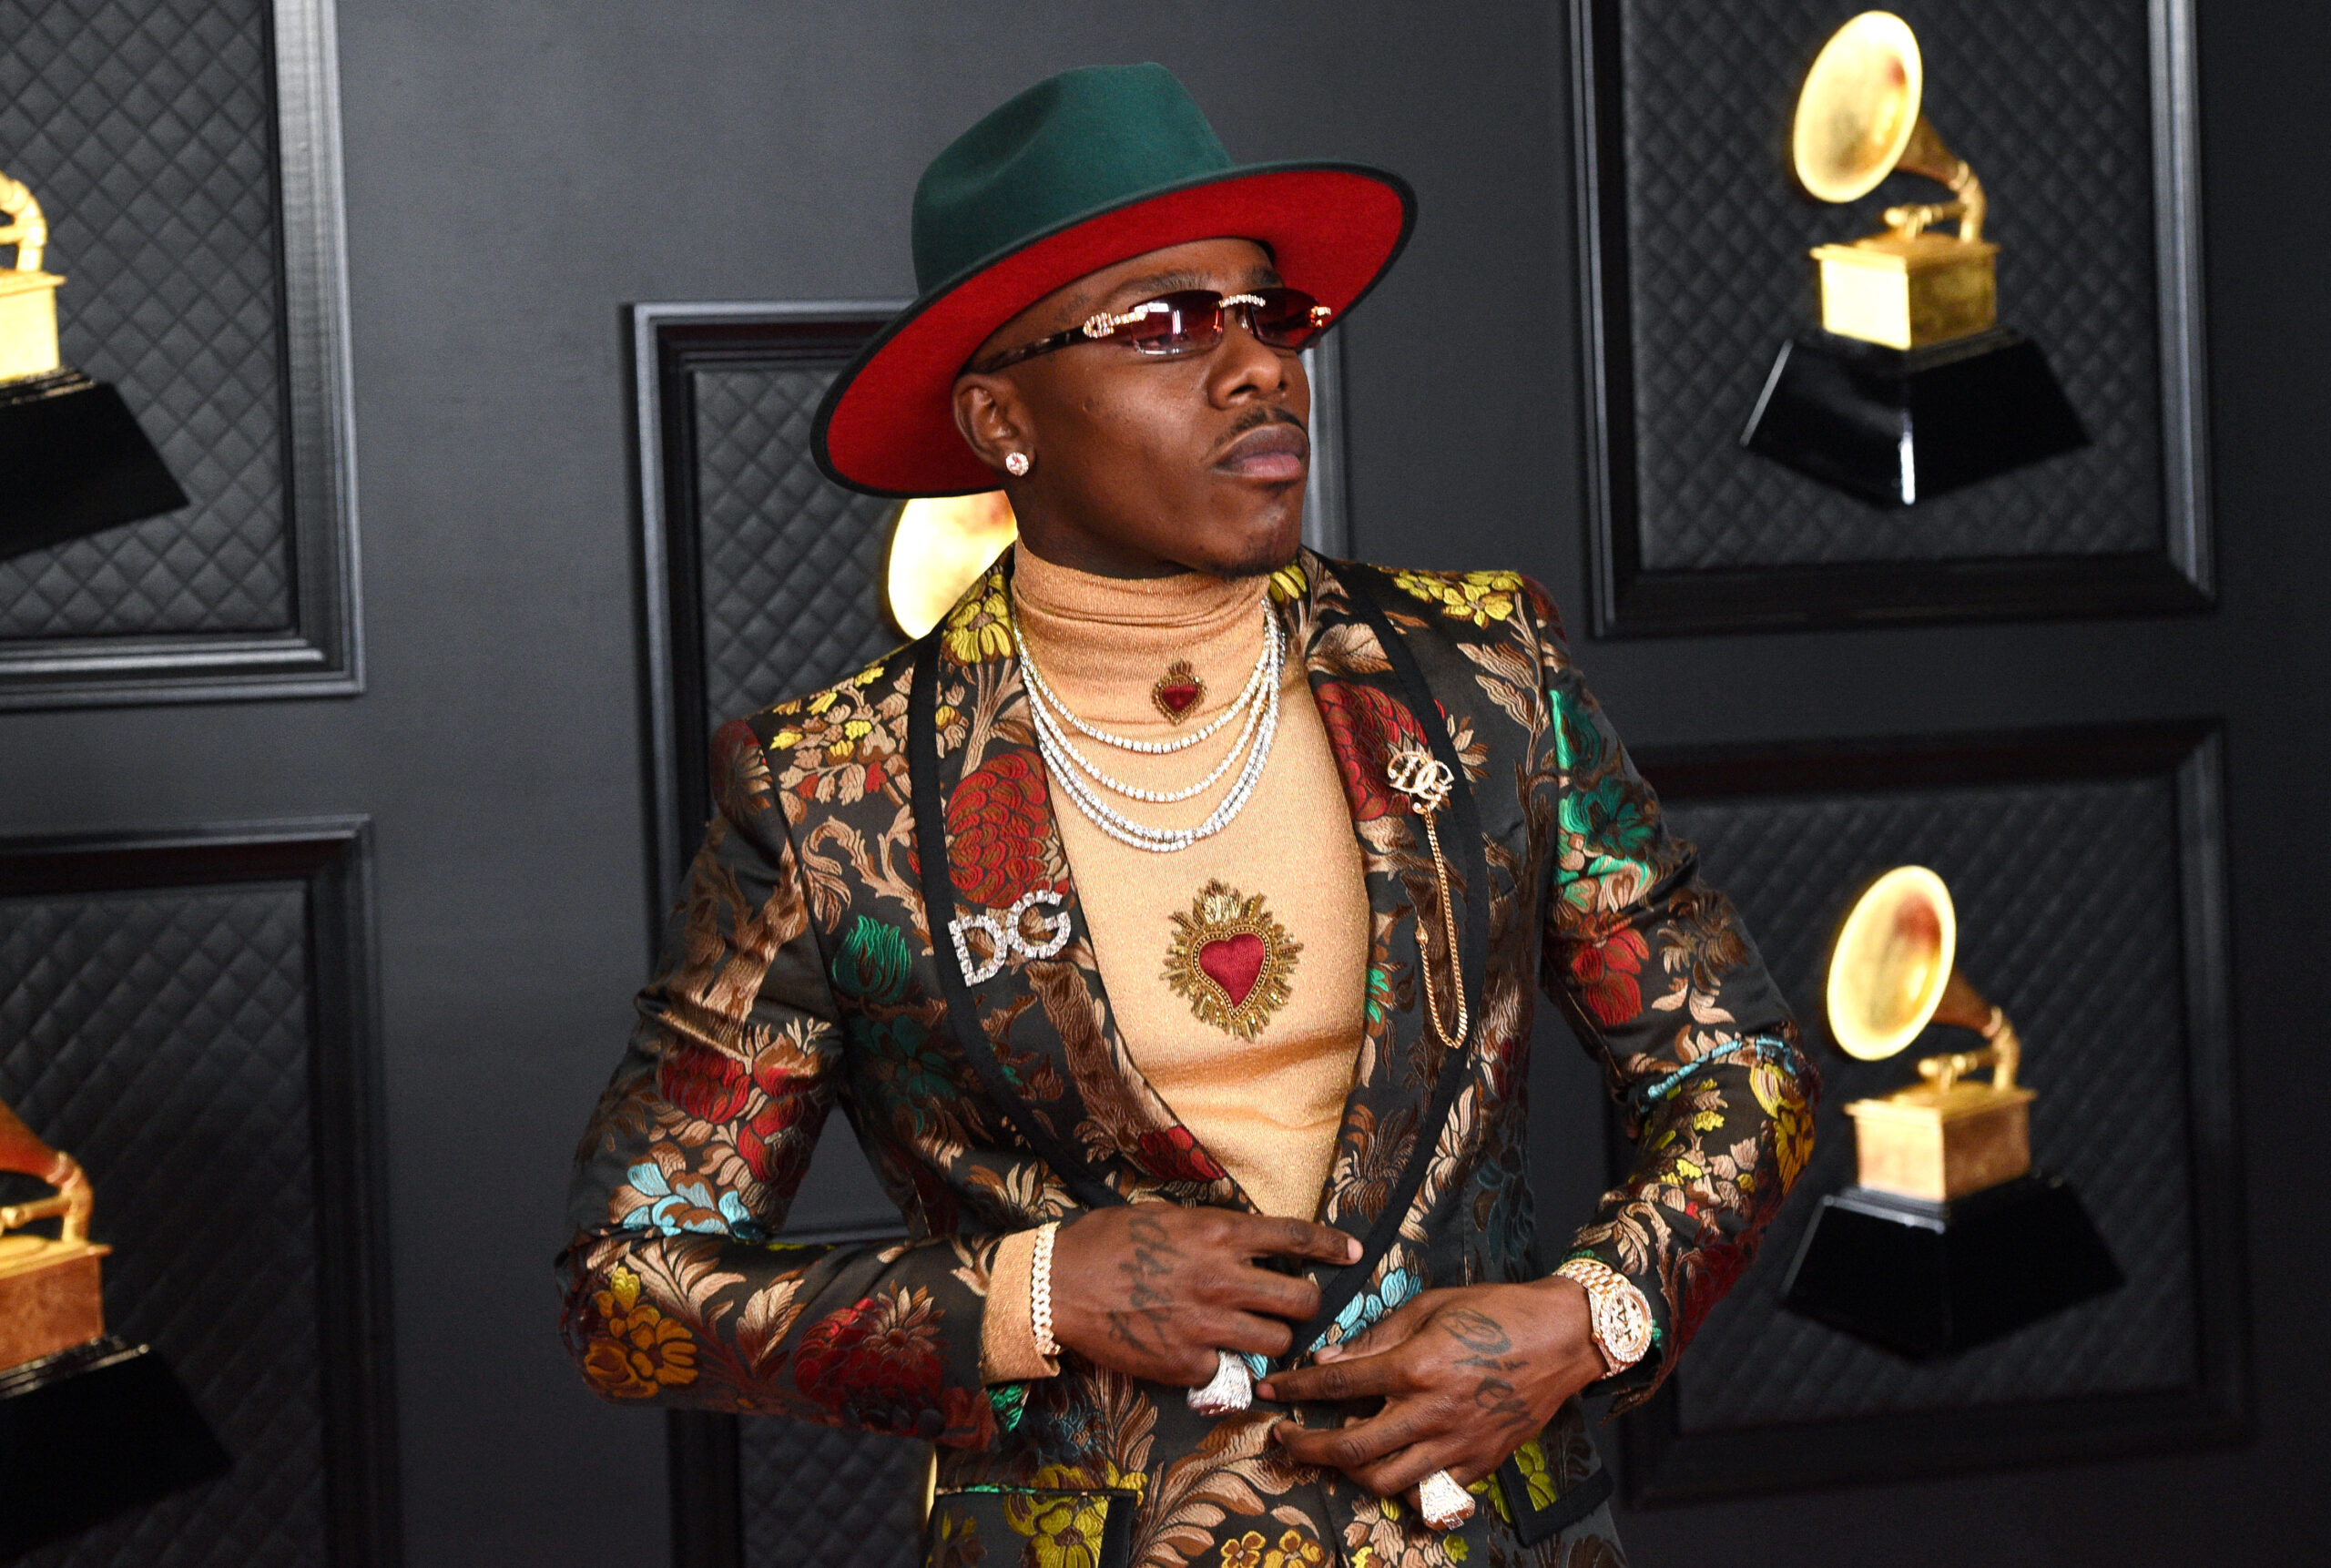 DaBaby Issues An Apology After Making Homophobic Remarks During A Performance